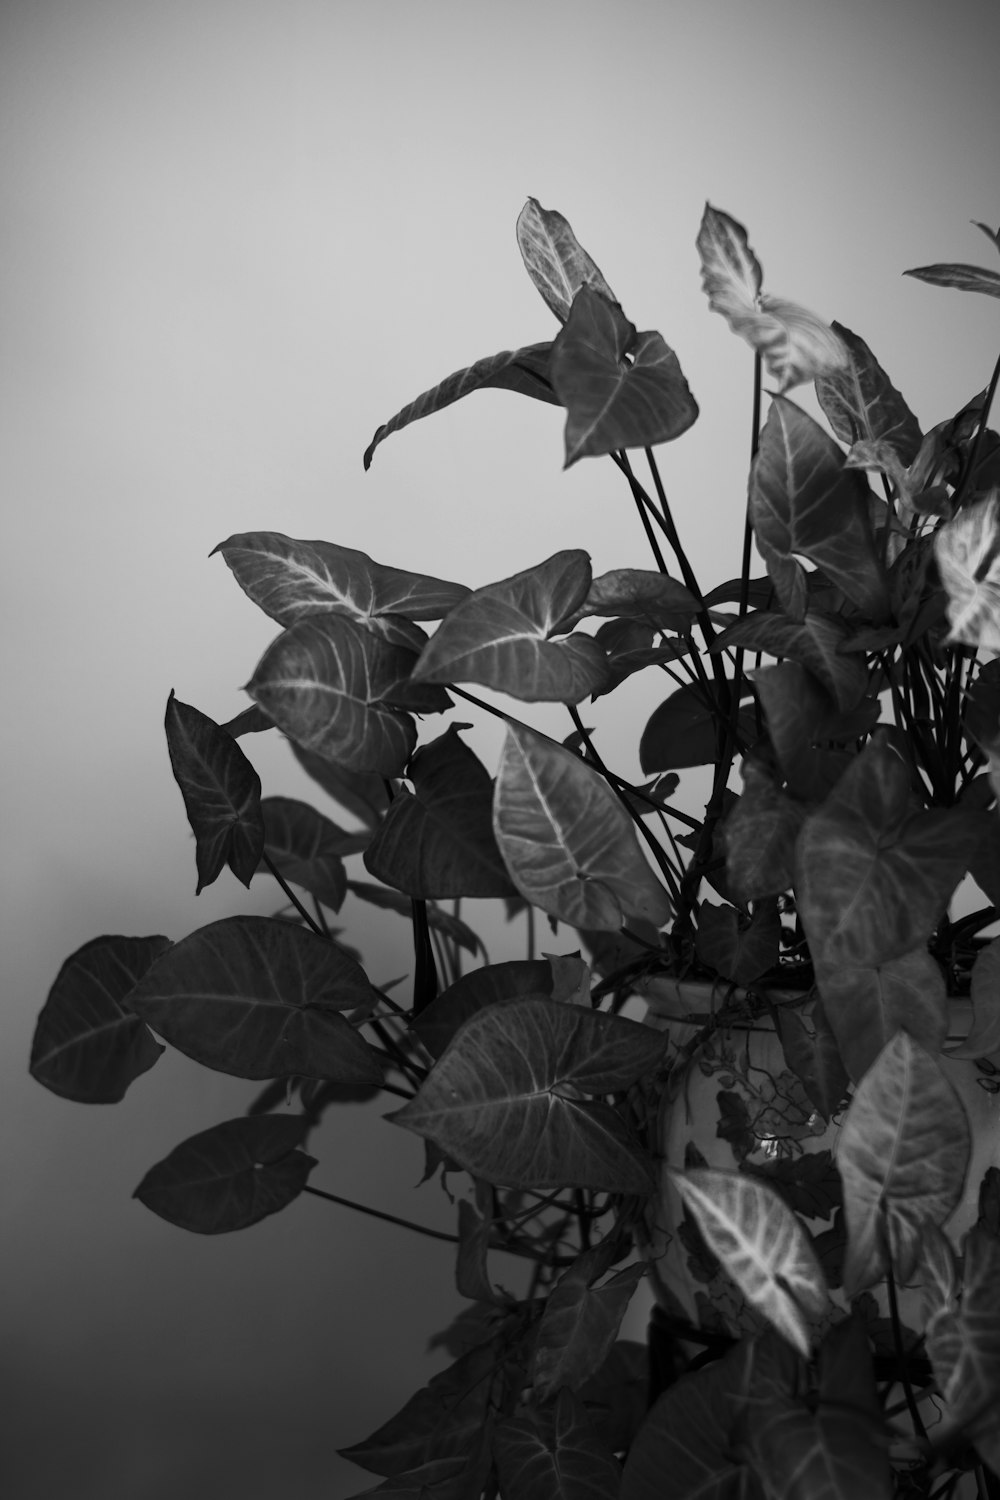 grayscale photo of leaves with water droplets